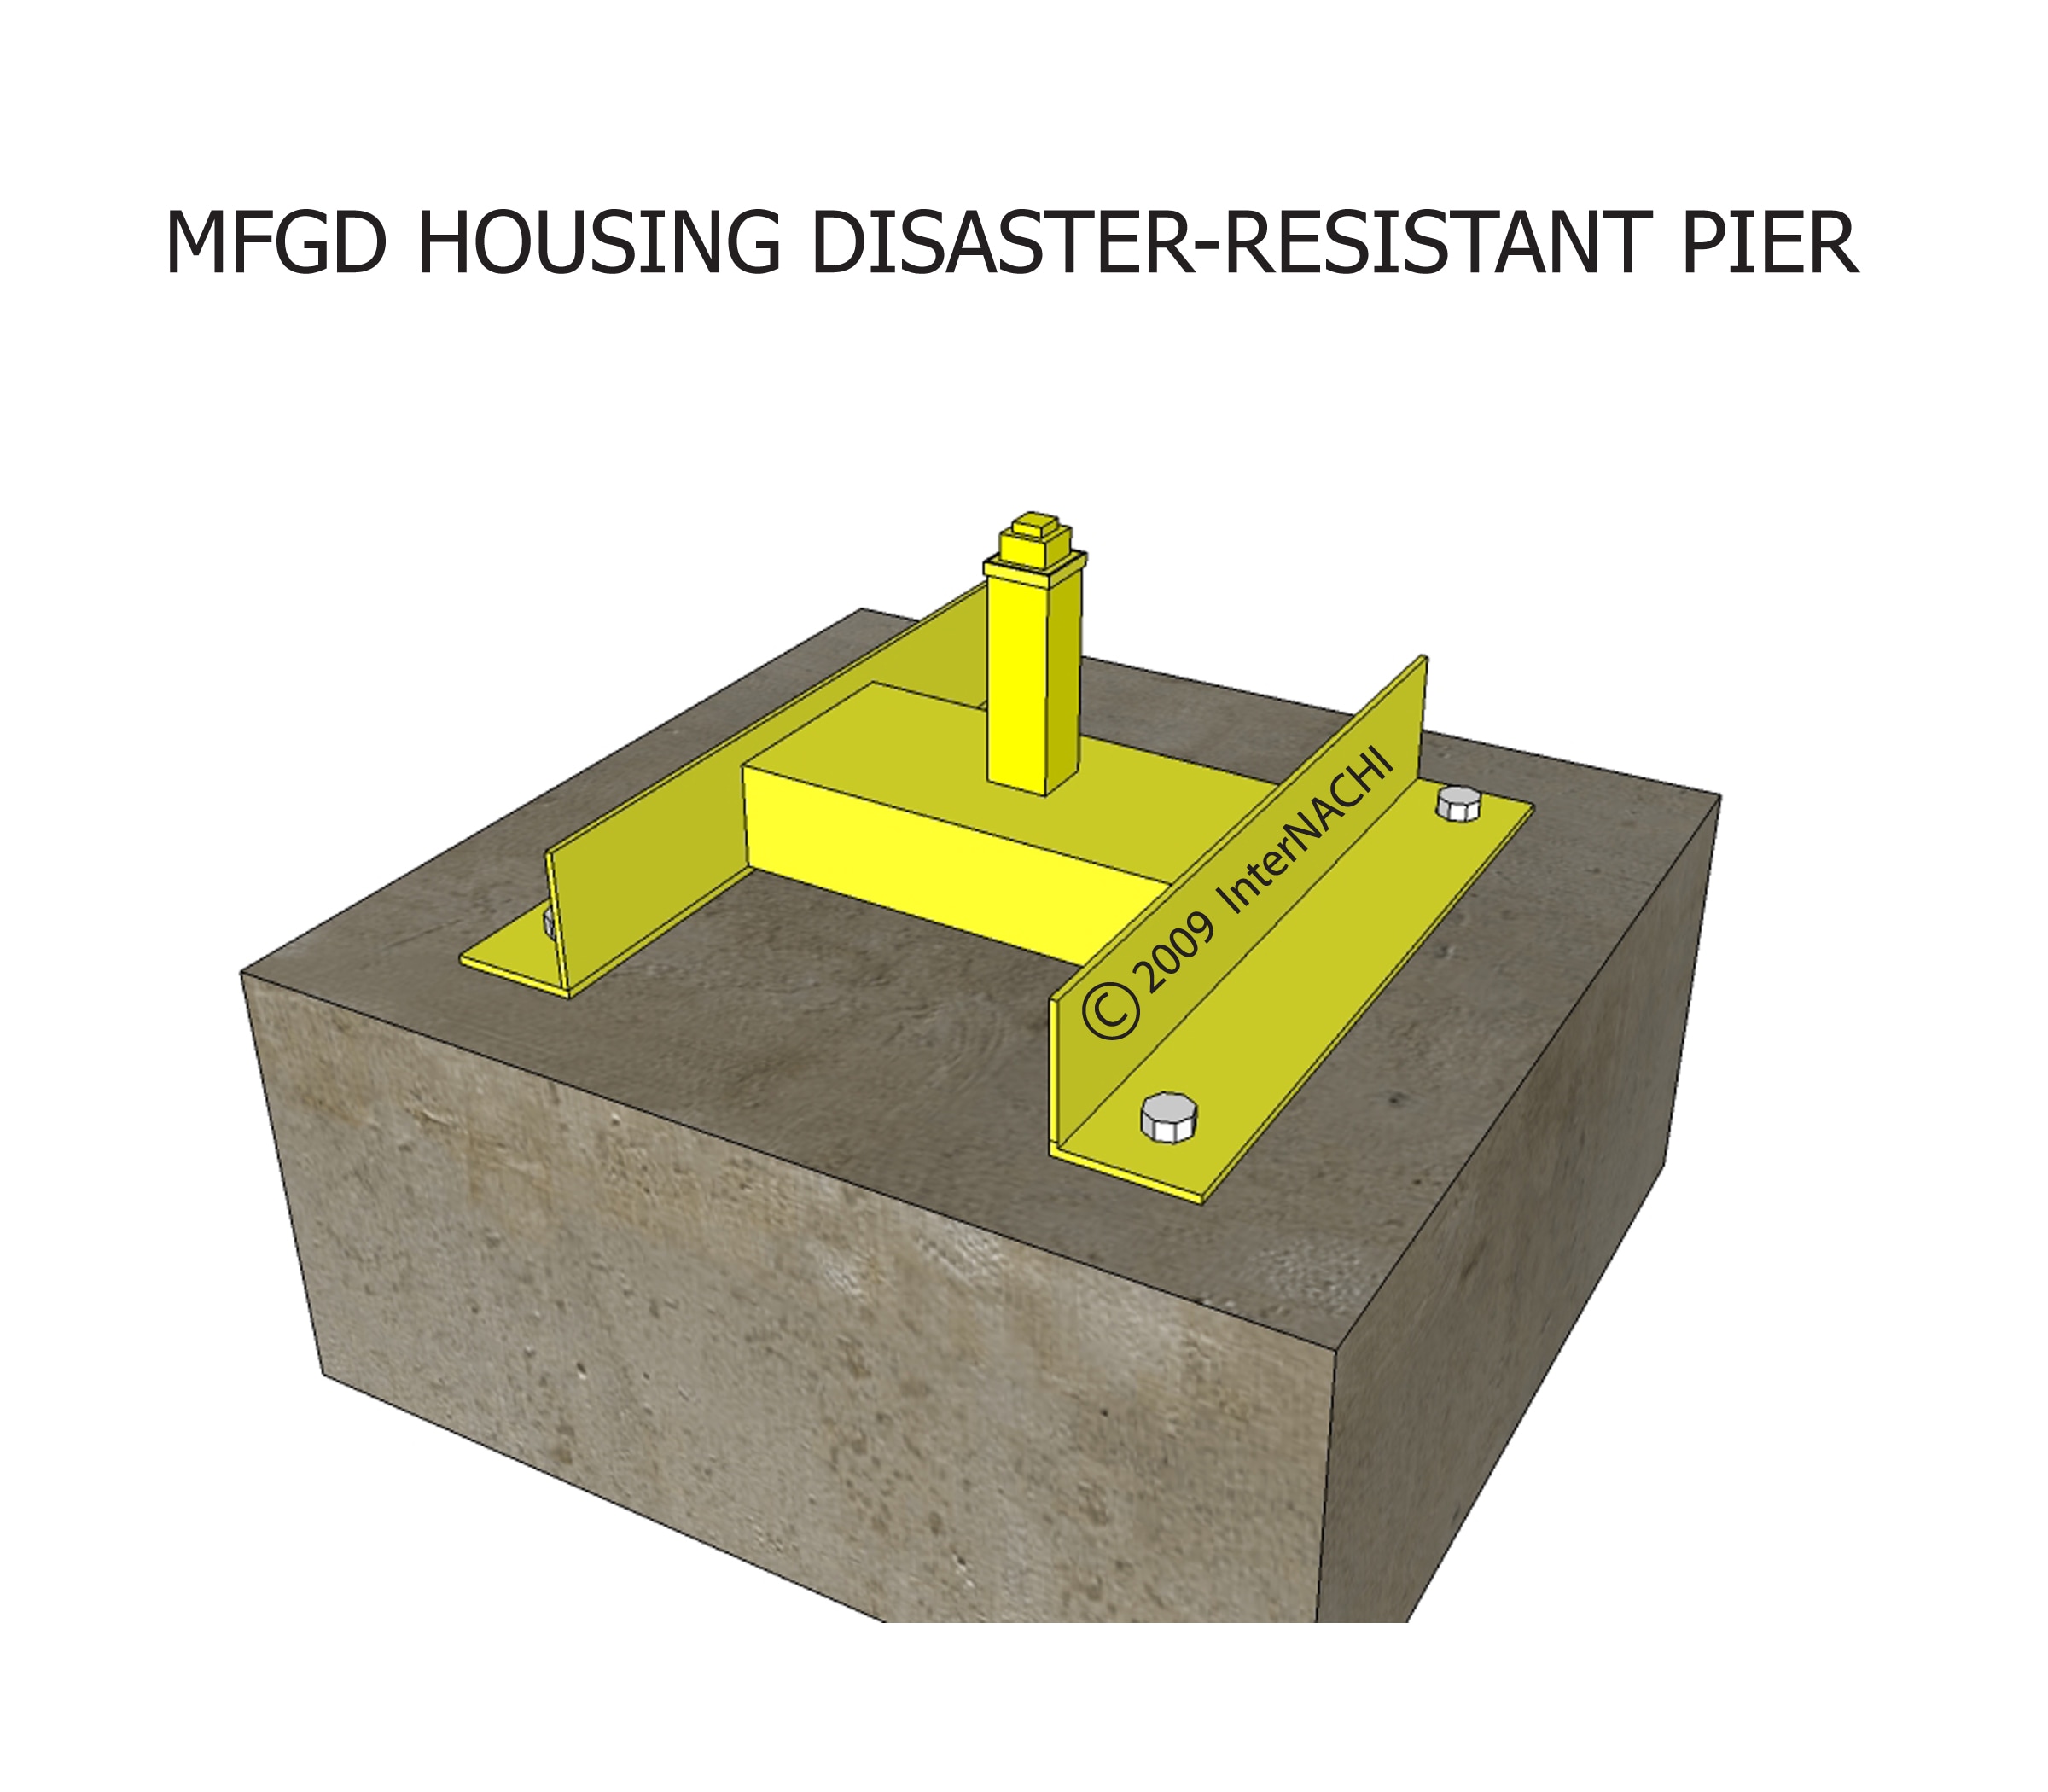 Manufactured housing disaster-resistant pier.